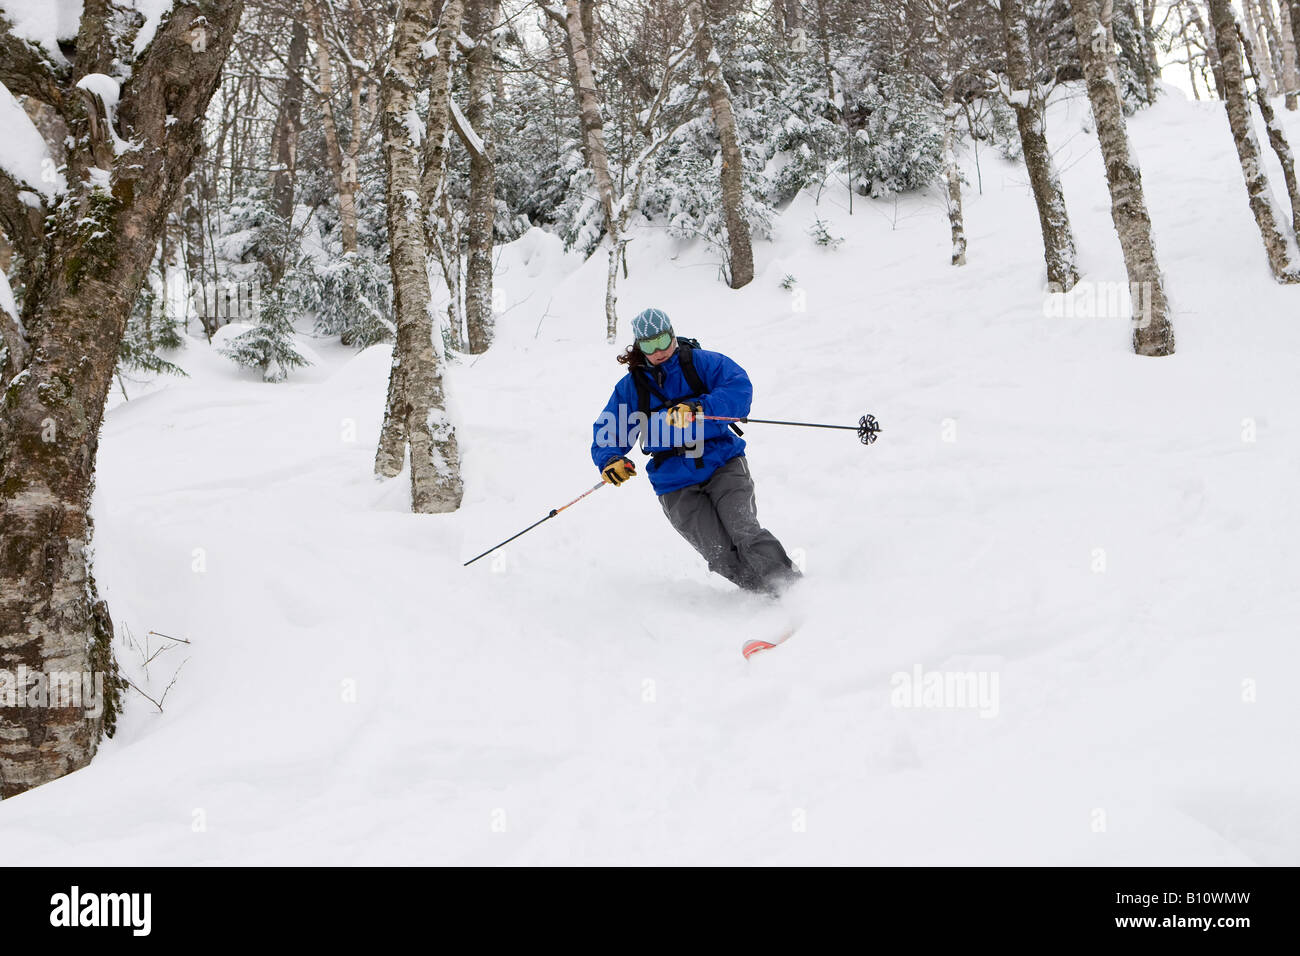 Il Telemark il Mount Mansfield backcountry in Stowe Vermont Foto Stock